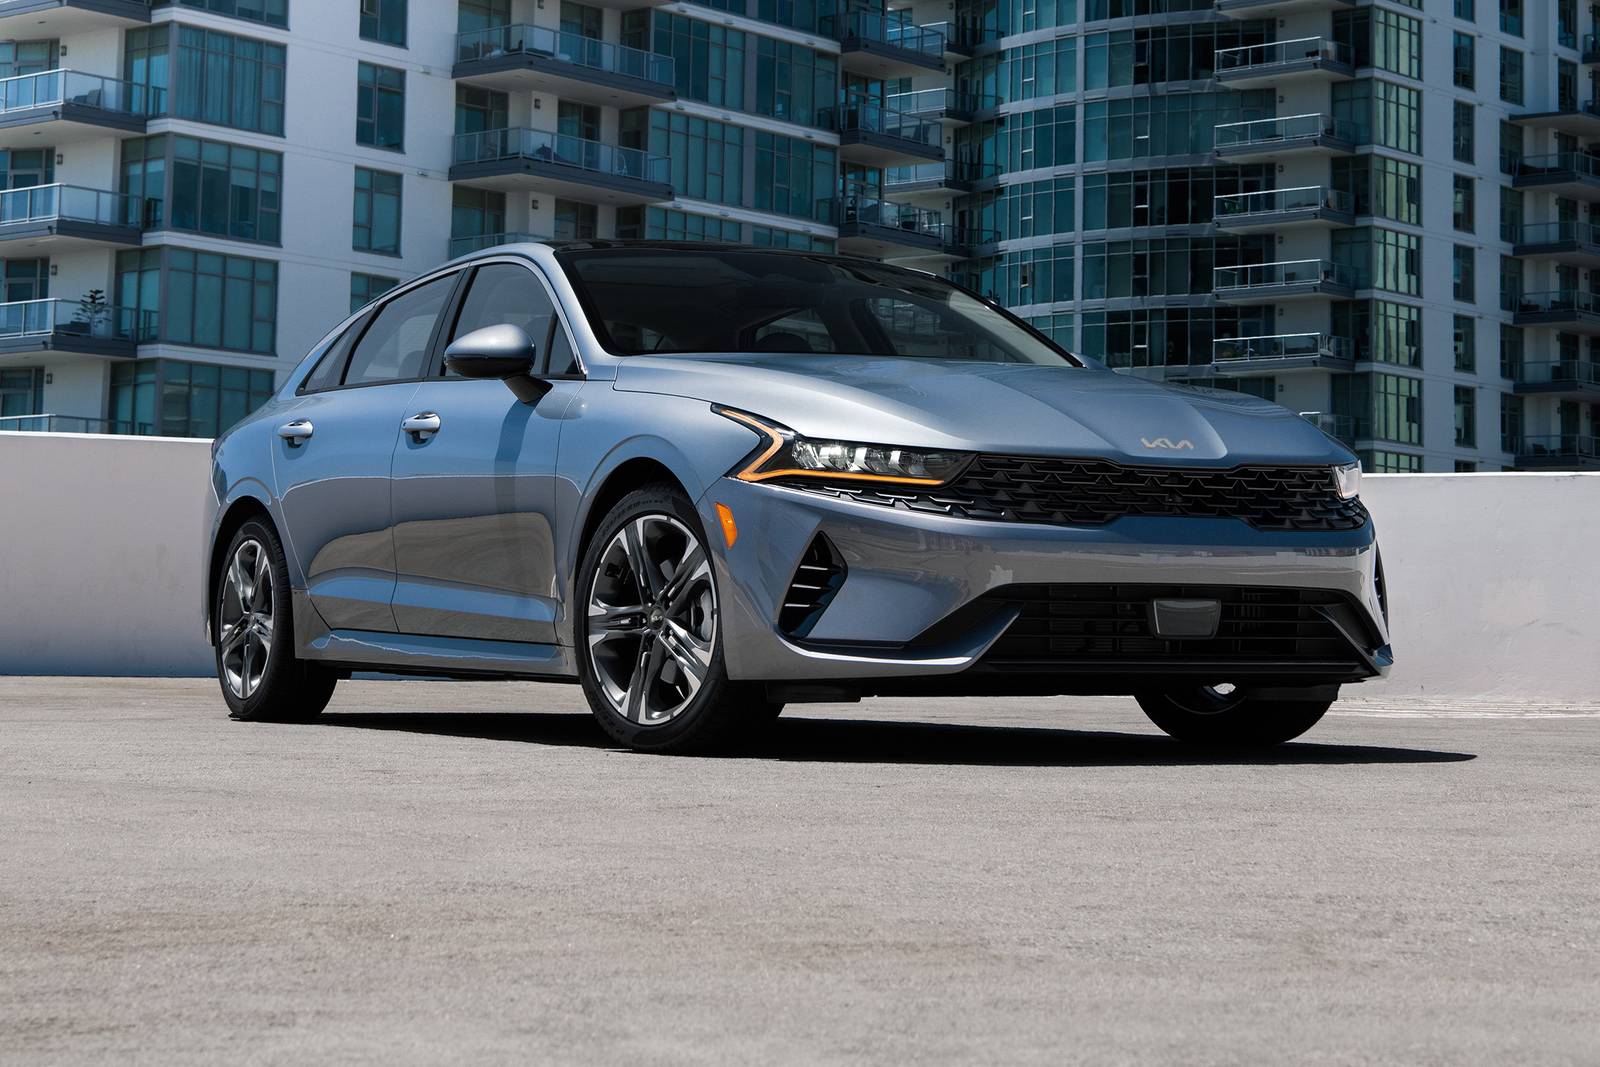 2022 Kia K5 Prices, Reviews, and Pictures | Edmunds